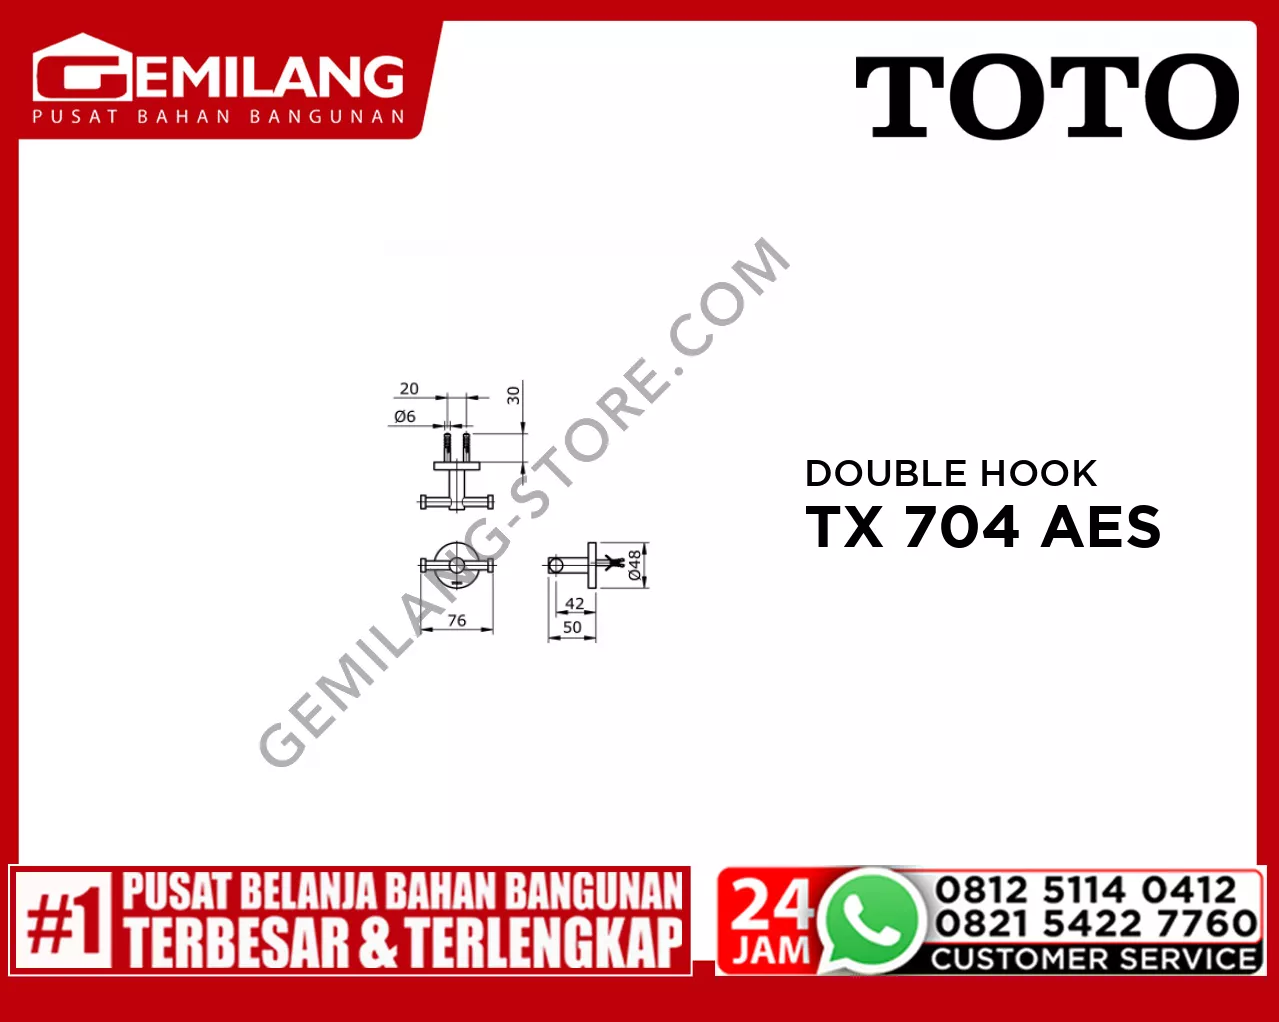 TOTO DOUBLE HOOK TX 704 AES